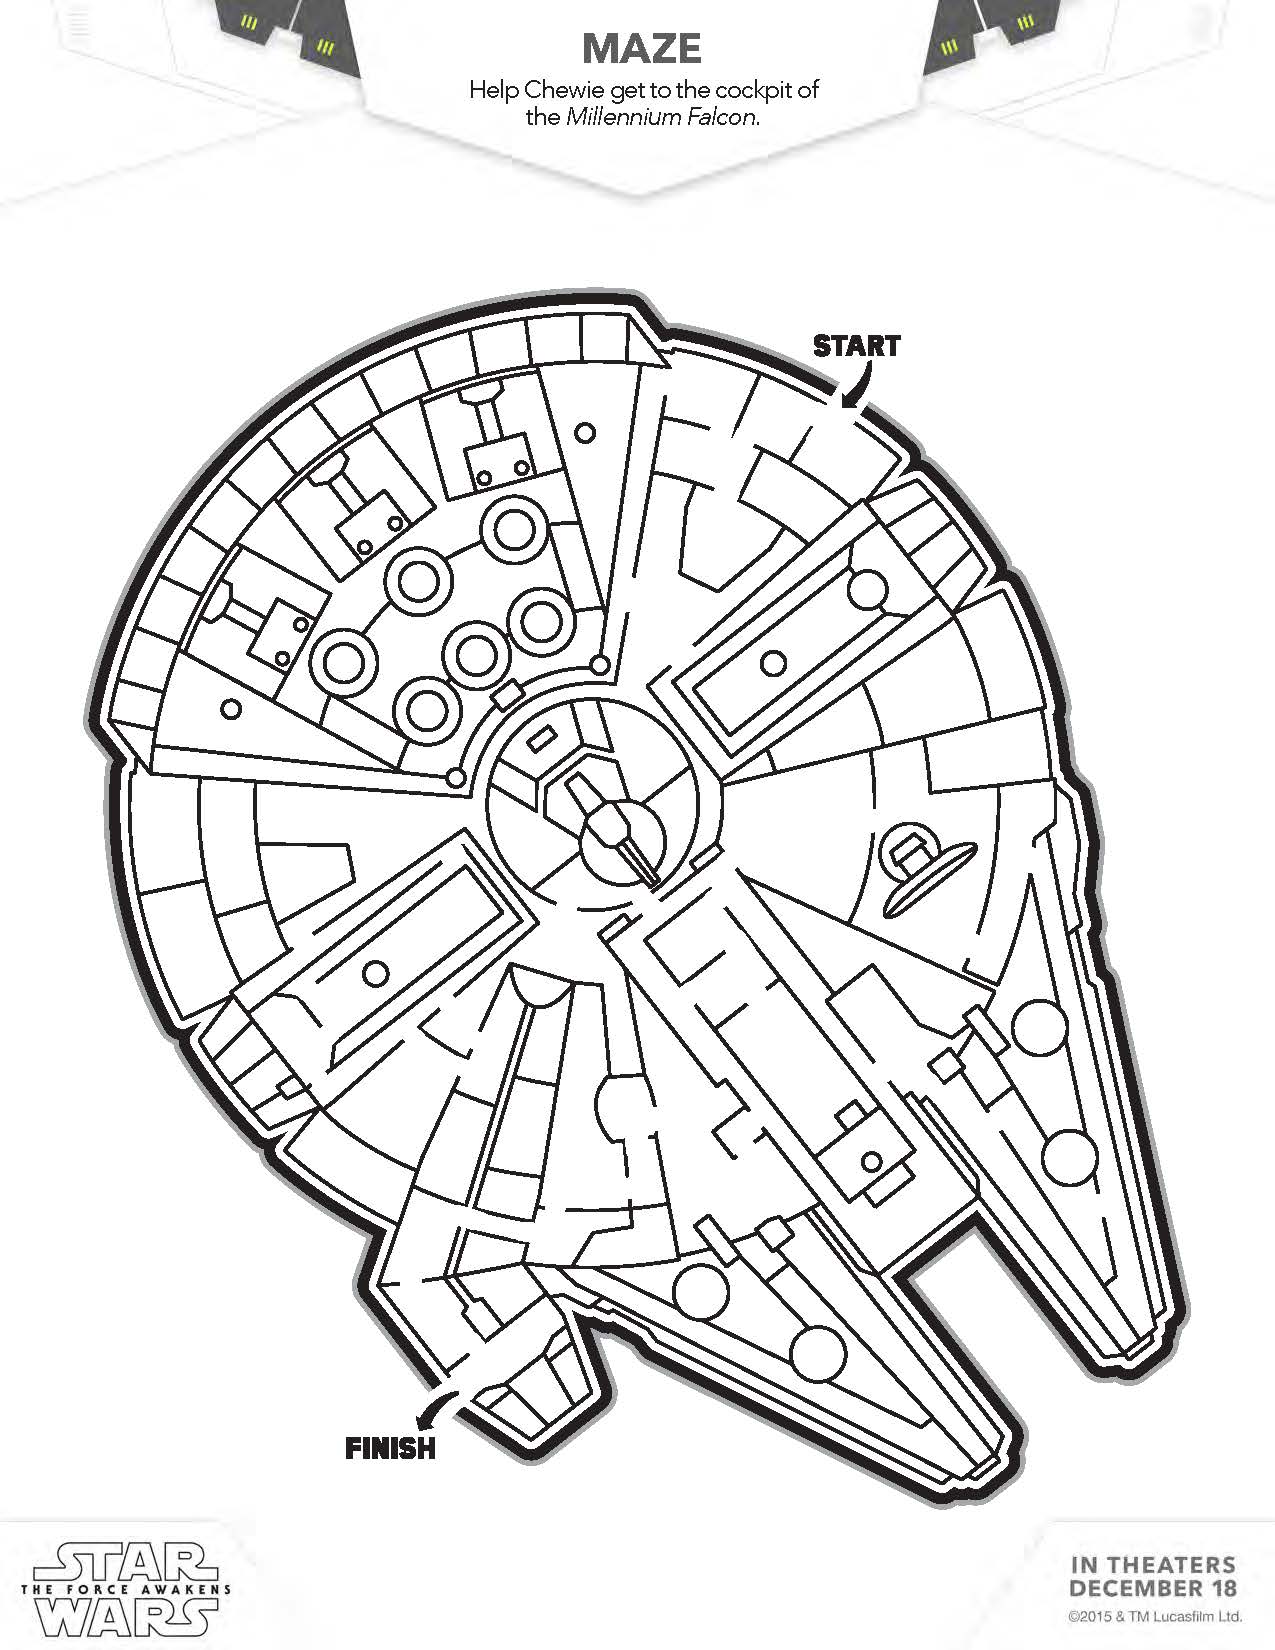 Star Wars coloring pages, The force awakens coloring pages